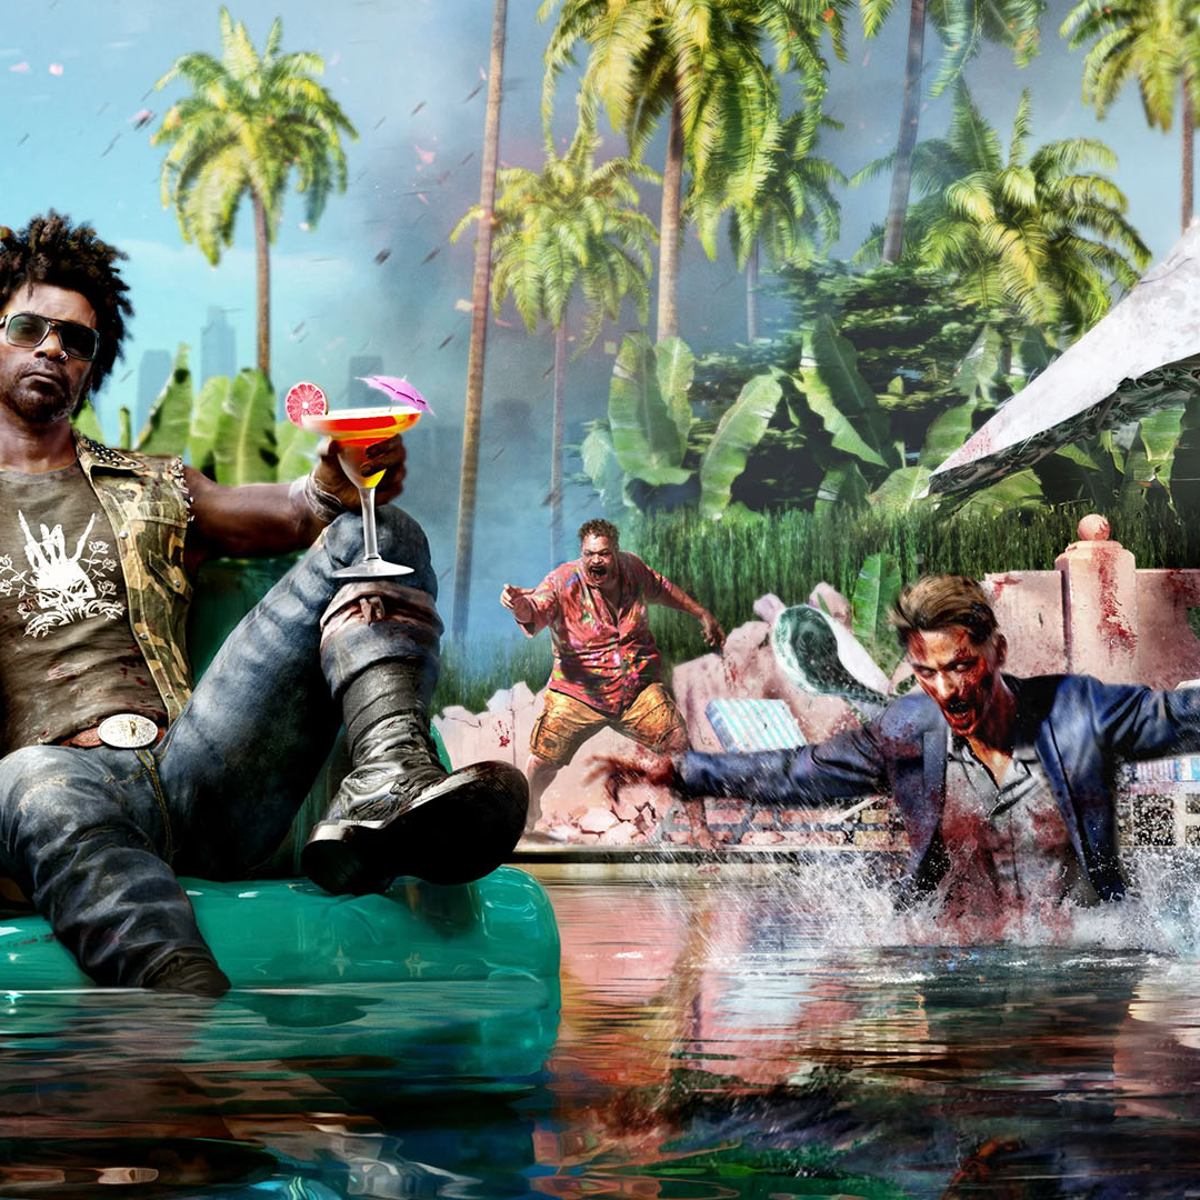 Dead Island 2 delivers solid performance and image quality on all consoles